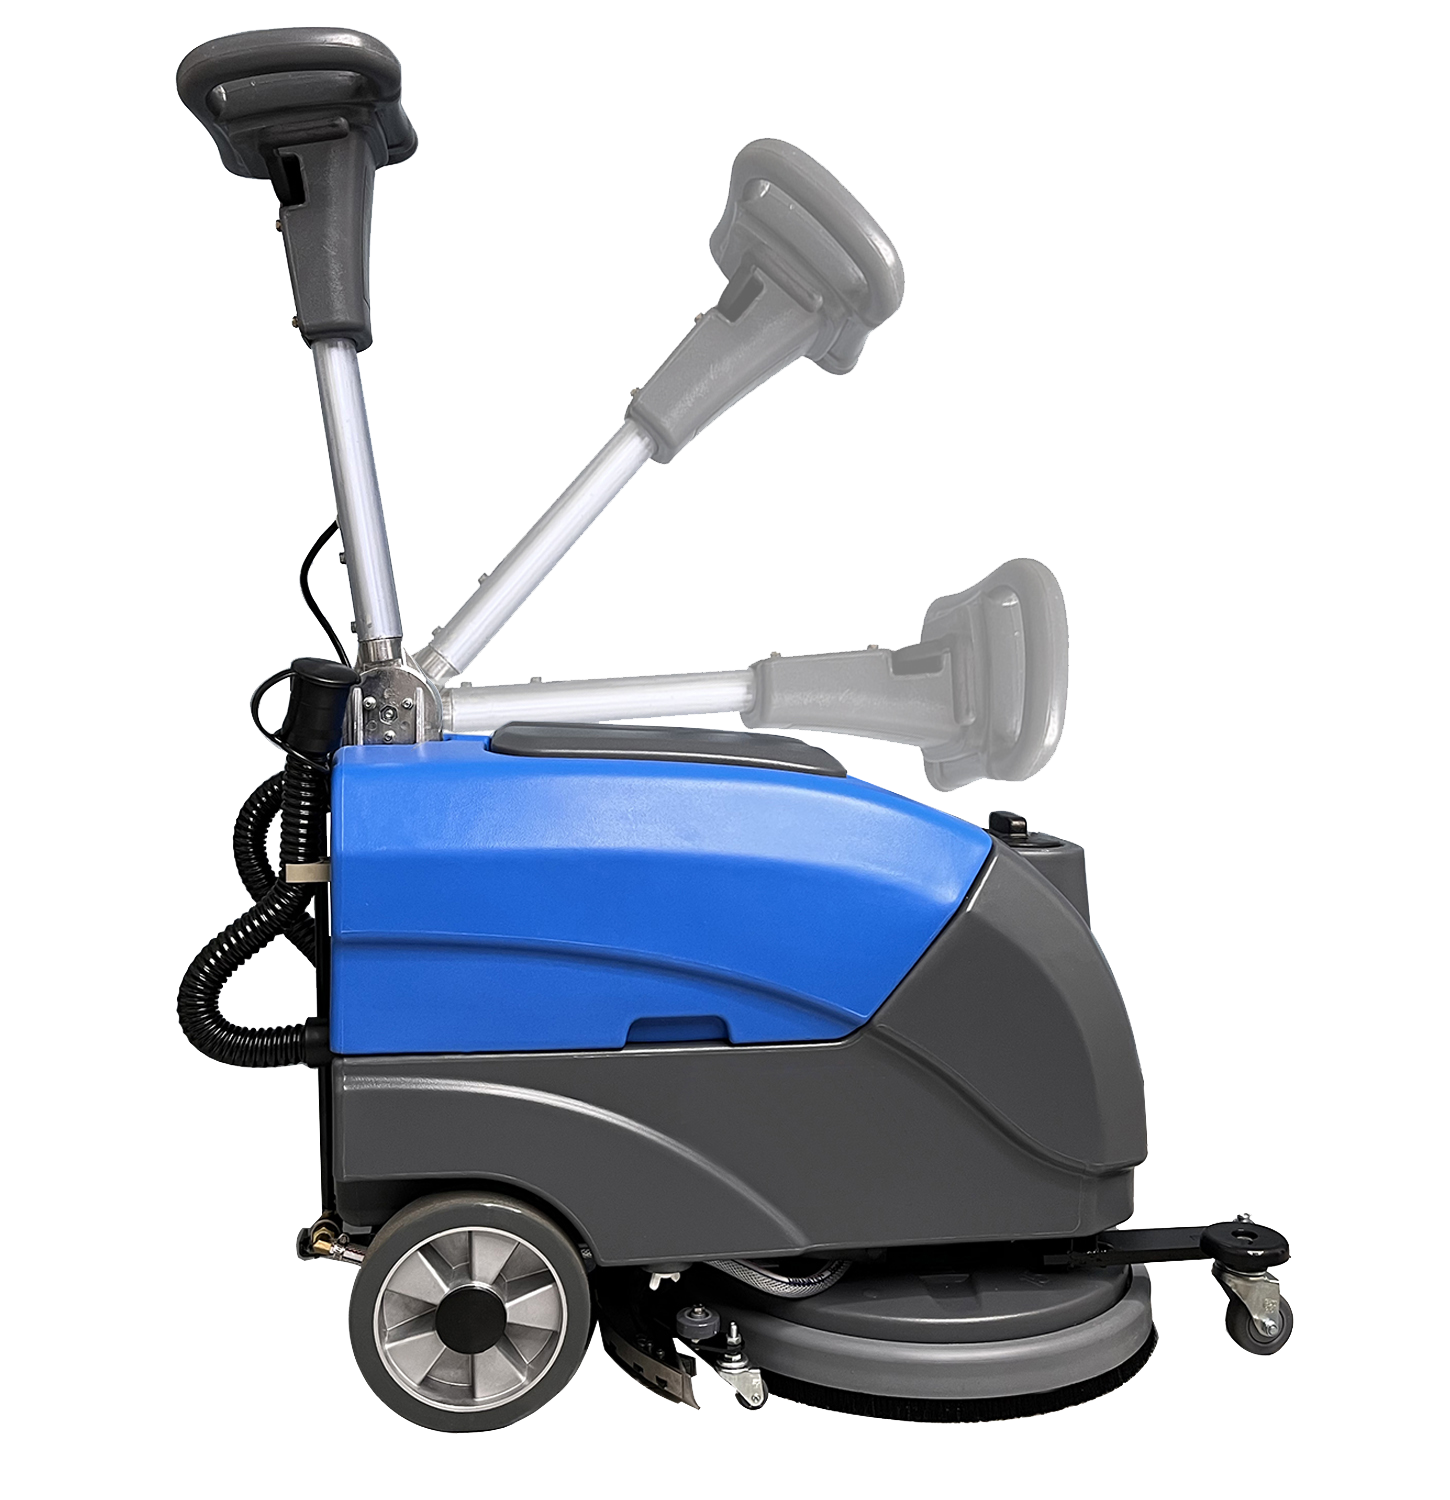 How does the size of a floor scrubber machine's scrubbing path impact its efficiency when cleaning large commercial spaces versus smaller?